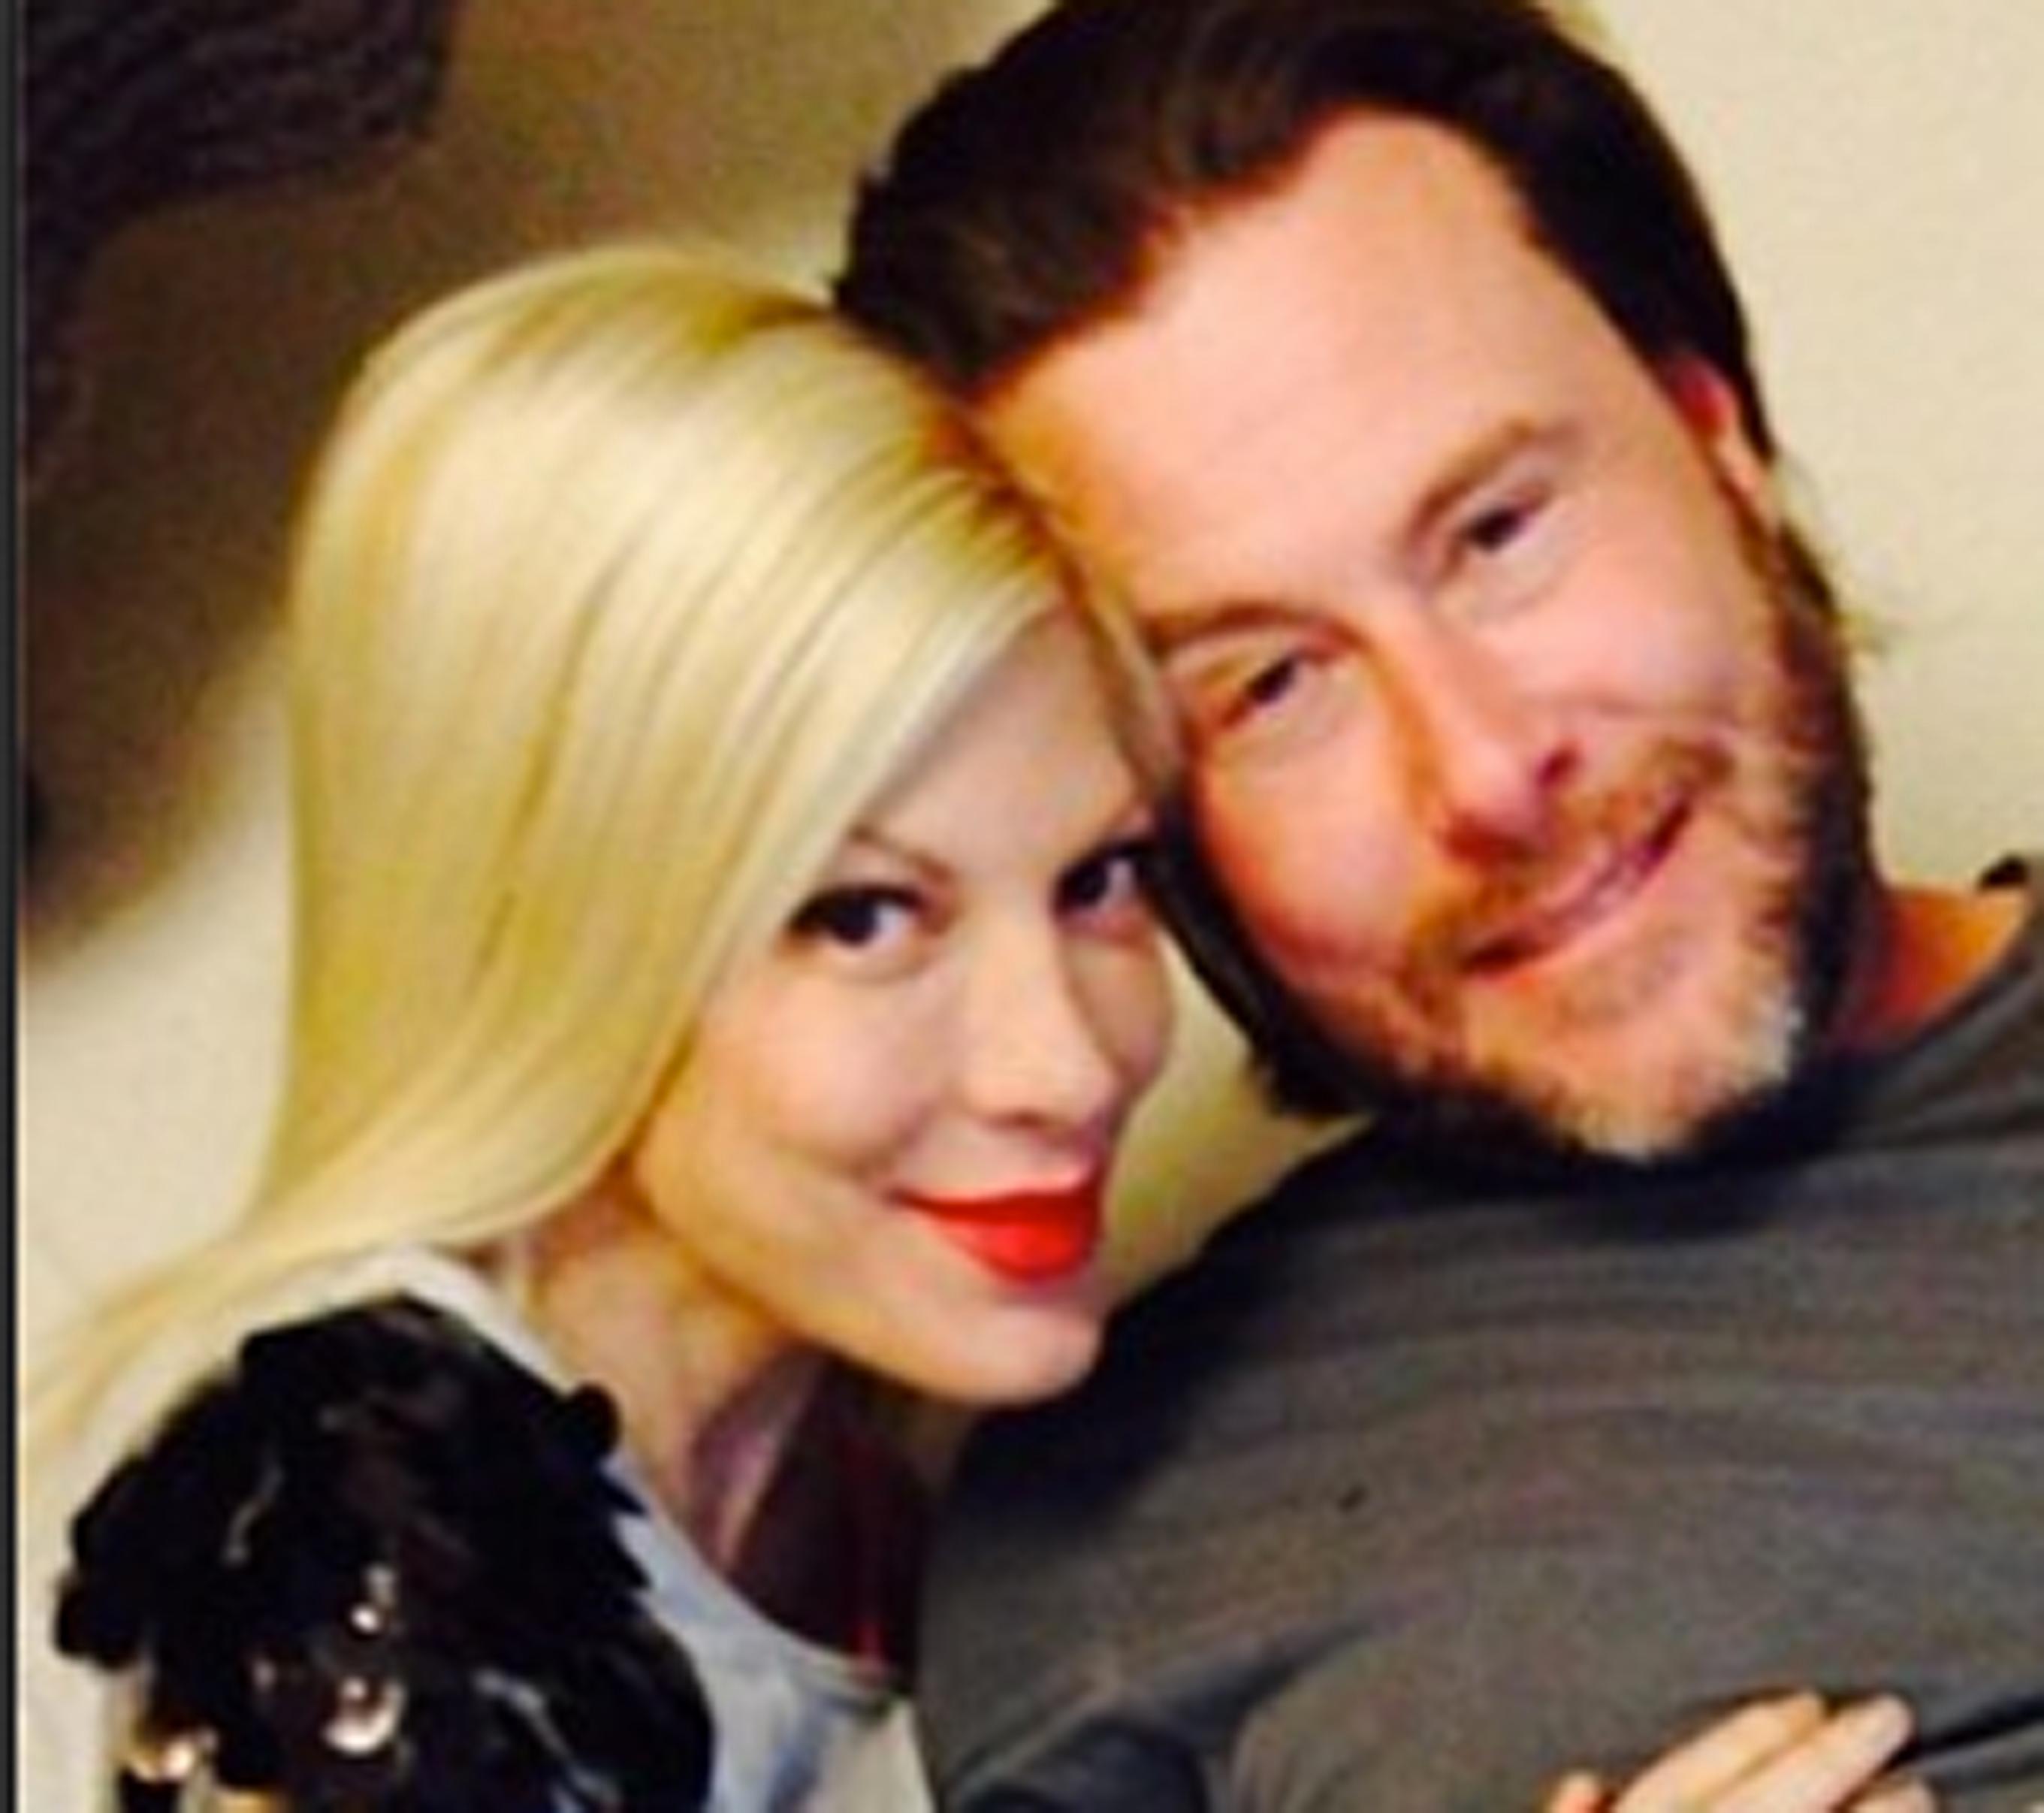 Tori Spelling and Dean McDermott Debut Their Family Holiday Card! Are